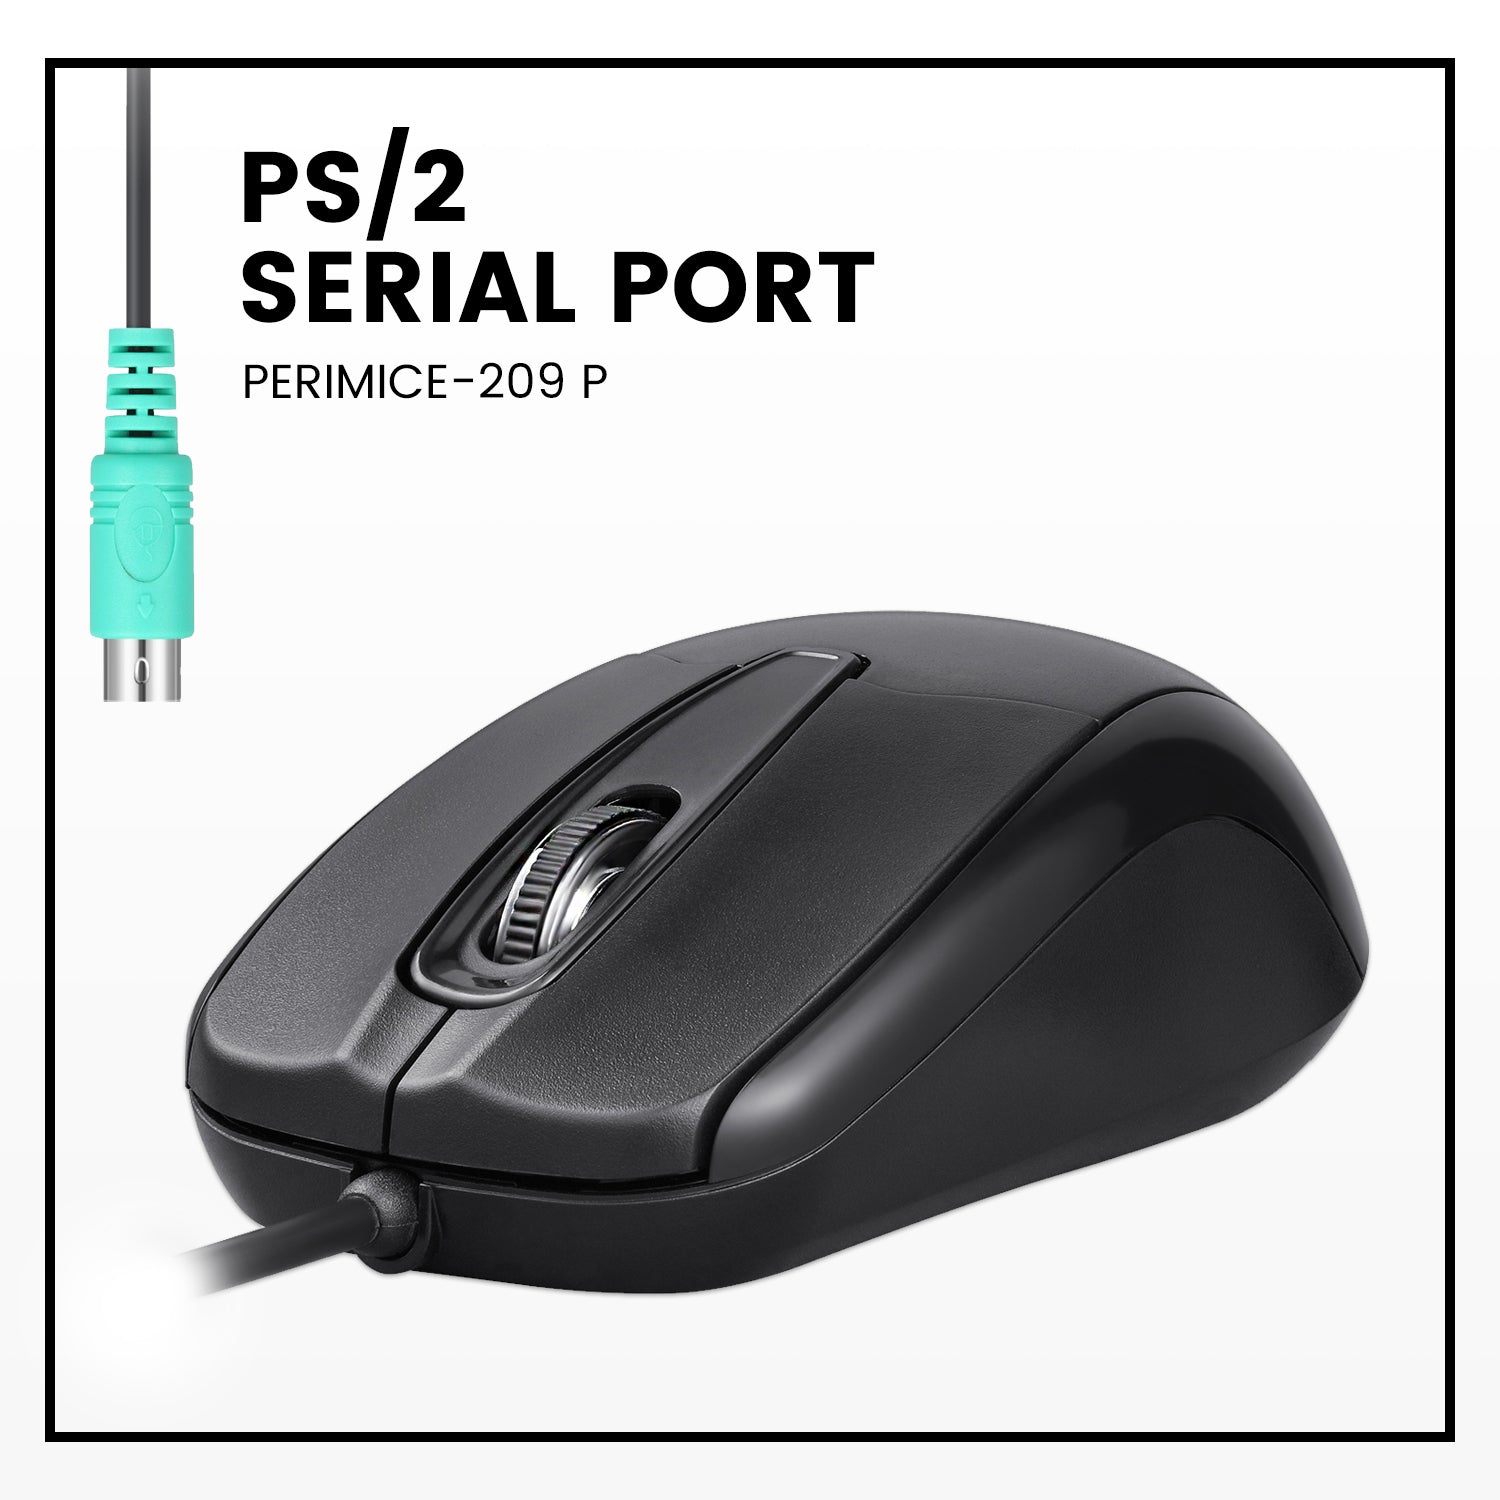 PERIMICE-209 P - Wired PS/2 Mouse - Perixx Europe